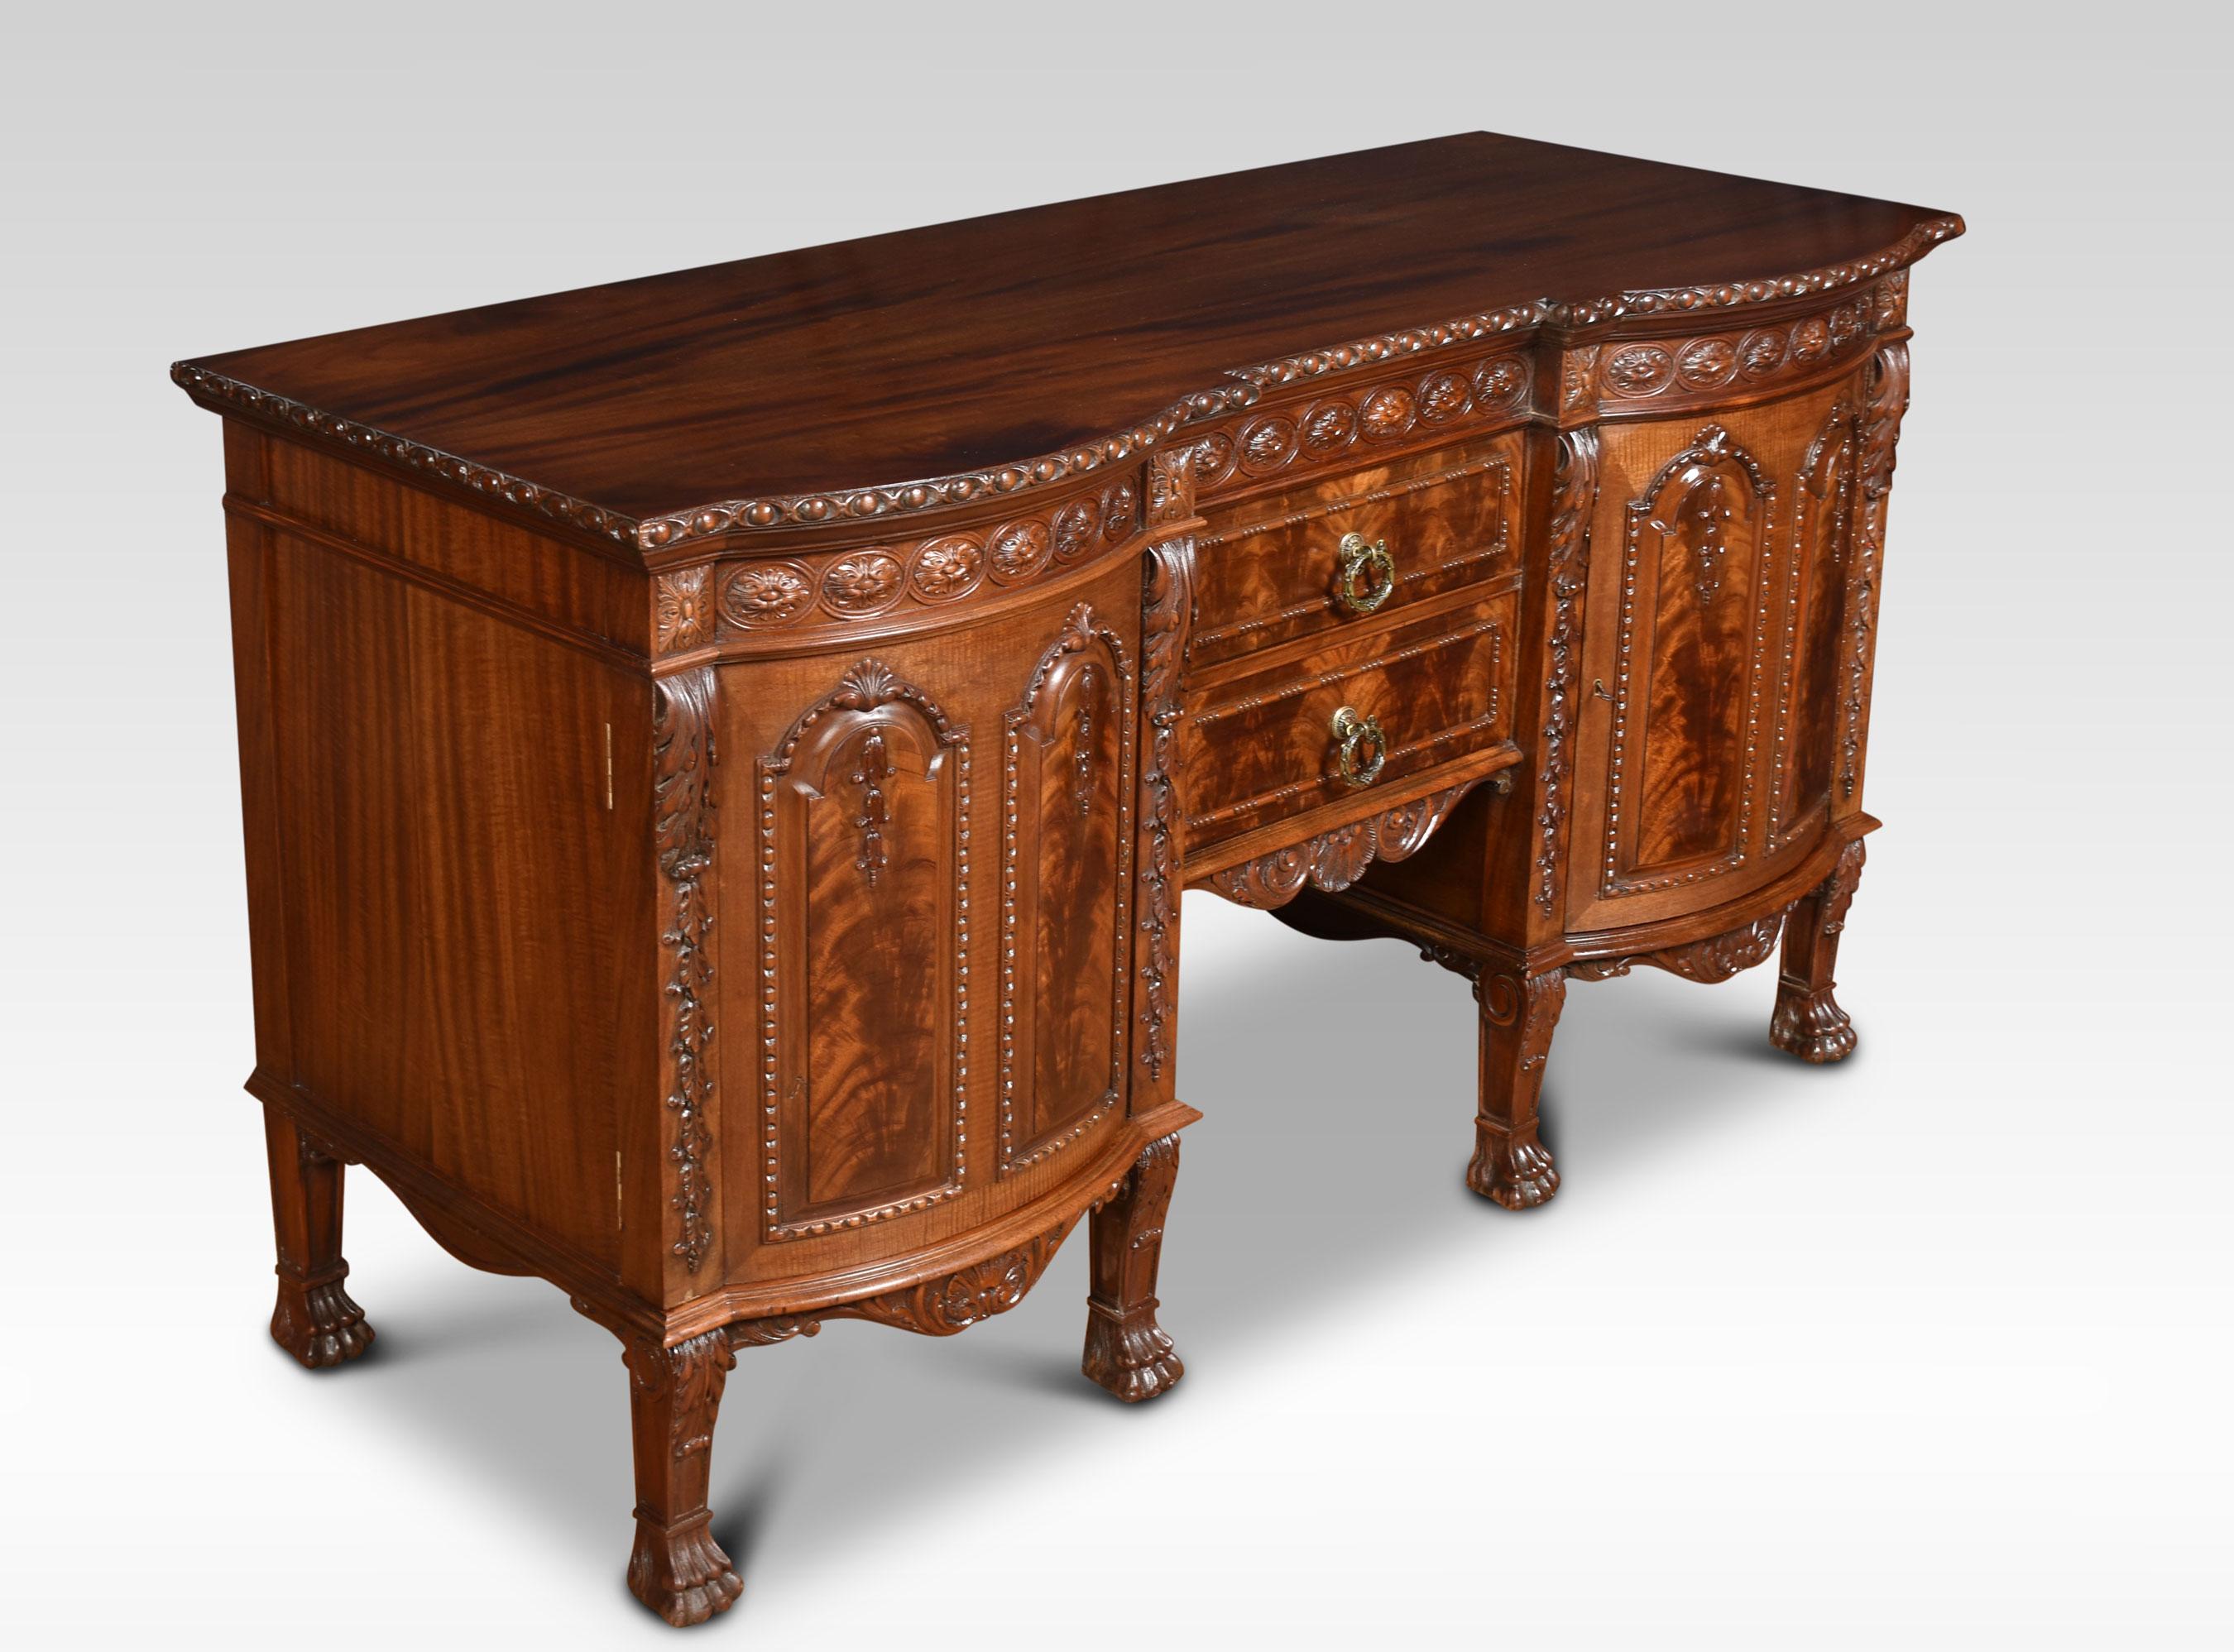 Carved Mahogany Inverted Break Front Sideboard In Good Condition For Sale In Cheshire, GB